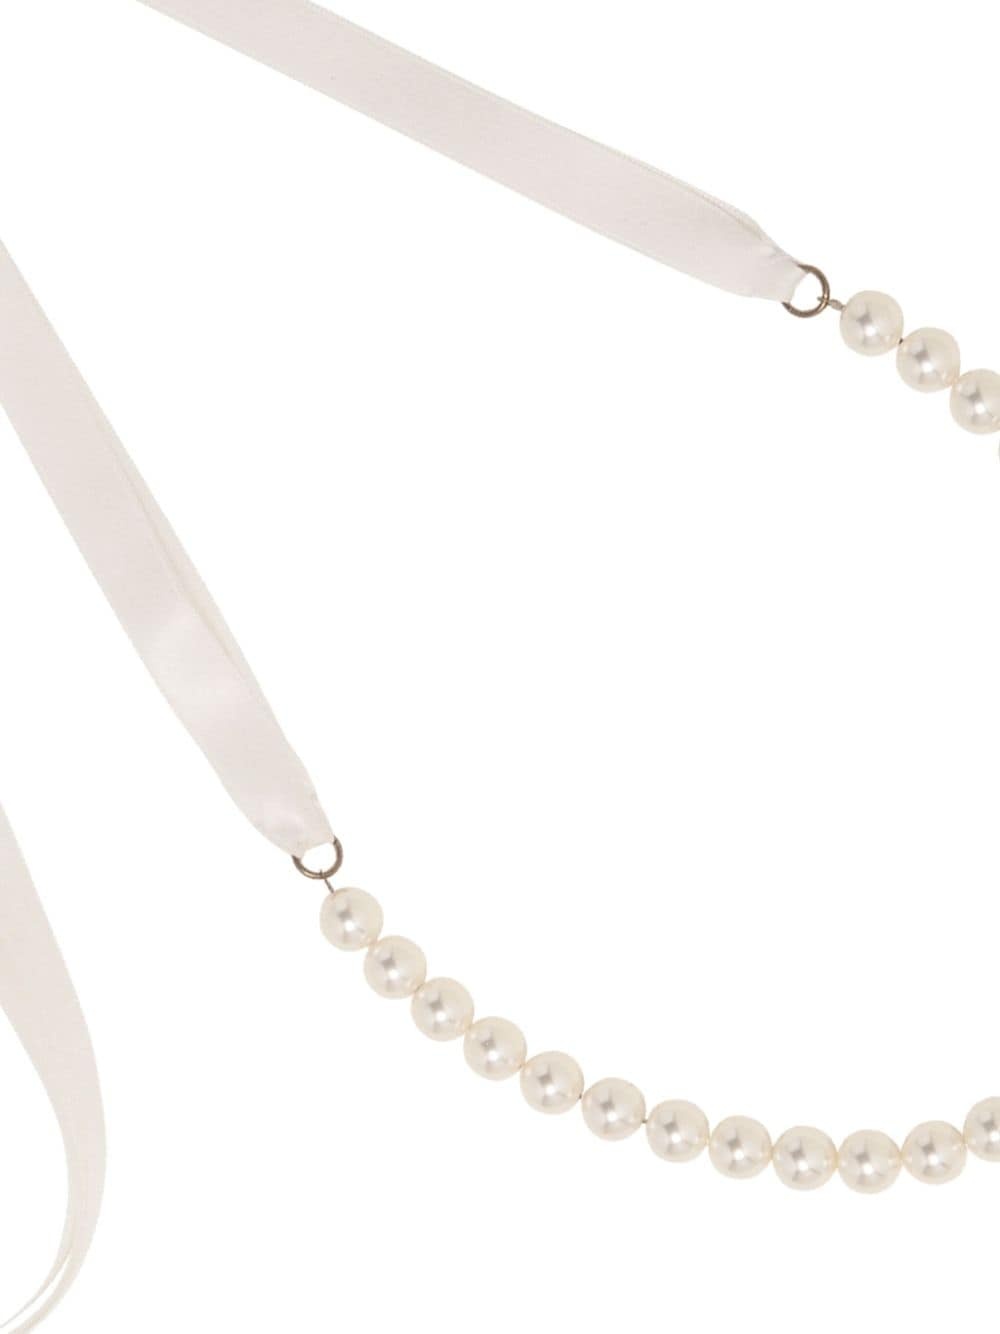 pearl-embellished ribbon tie necklace - 2